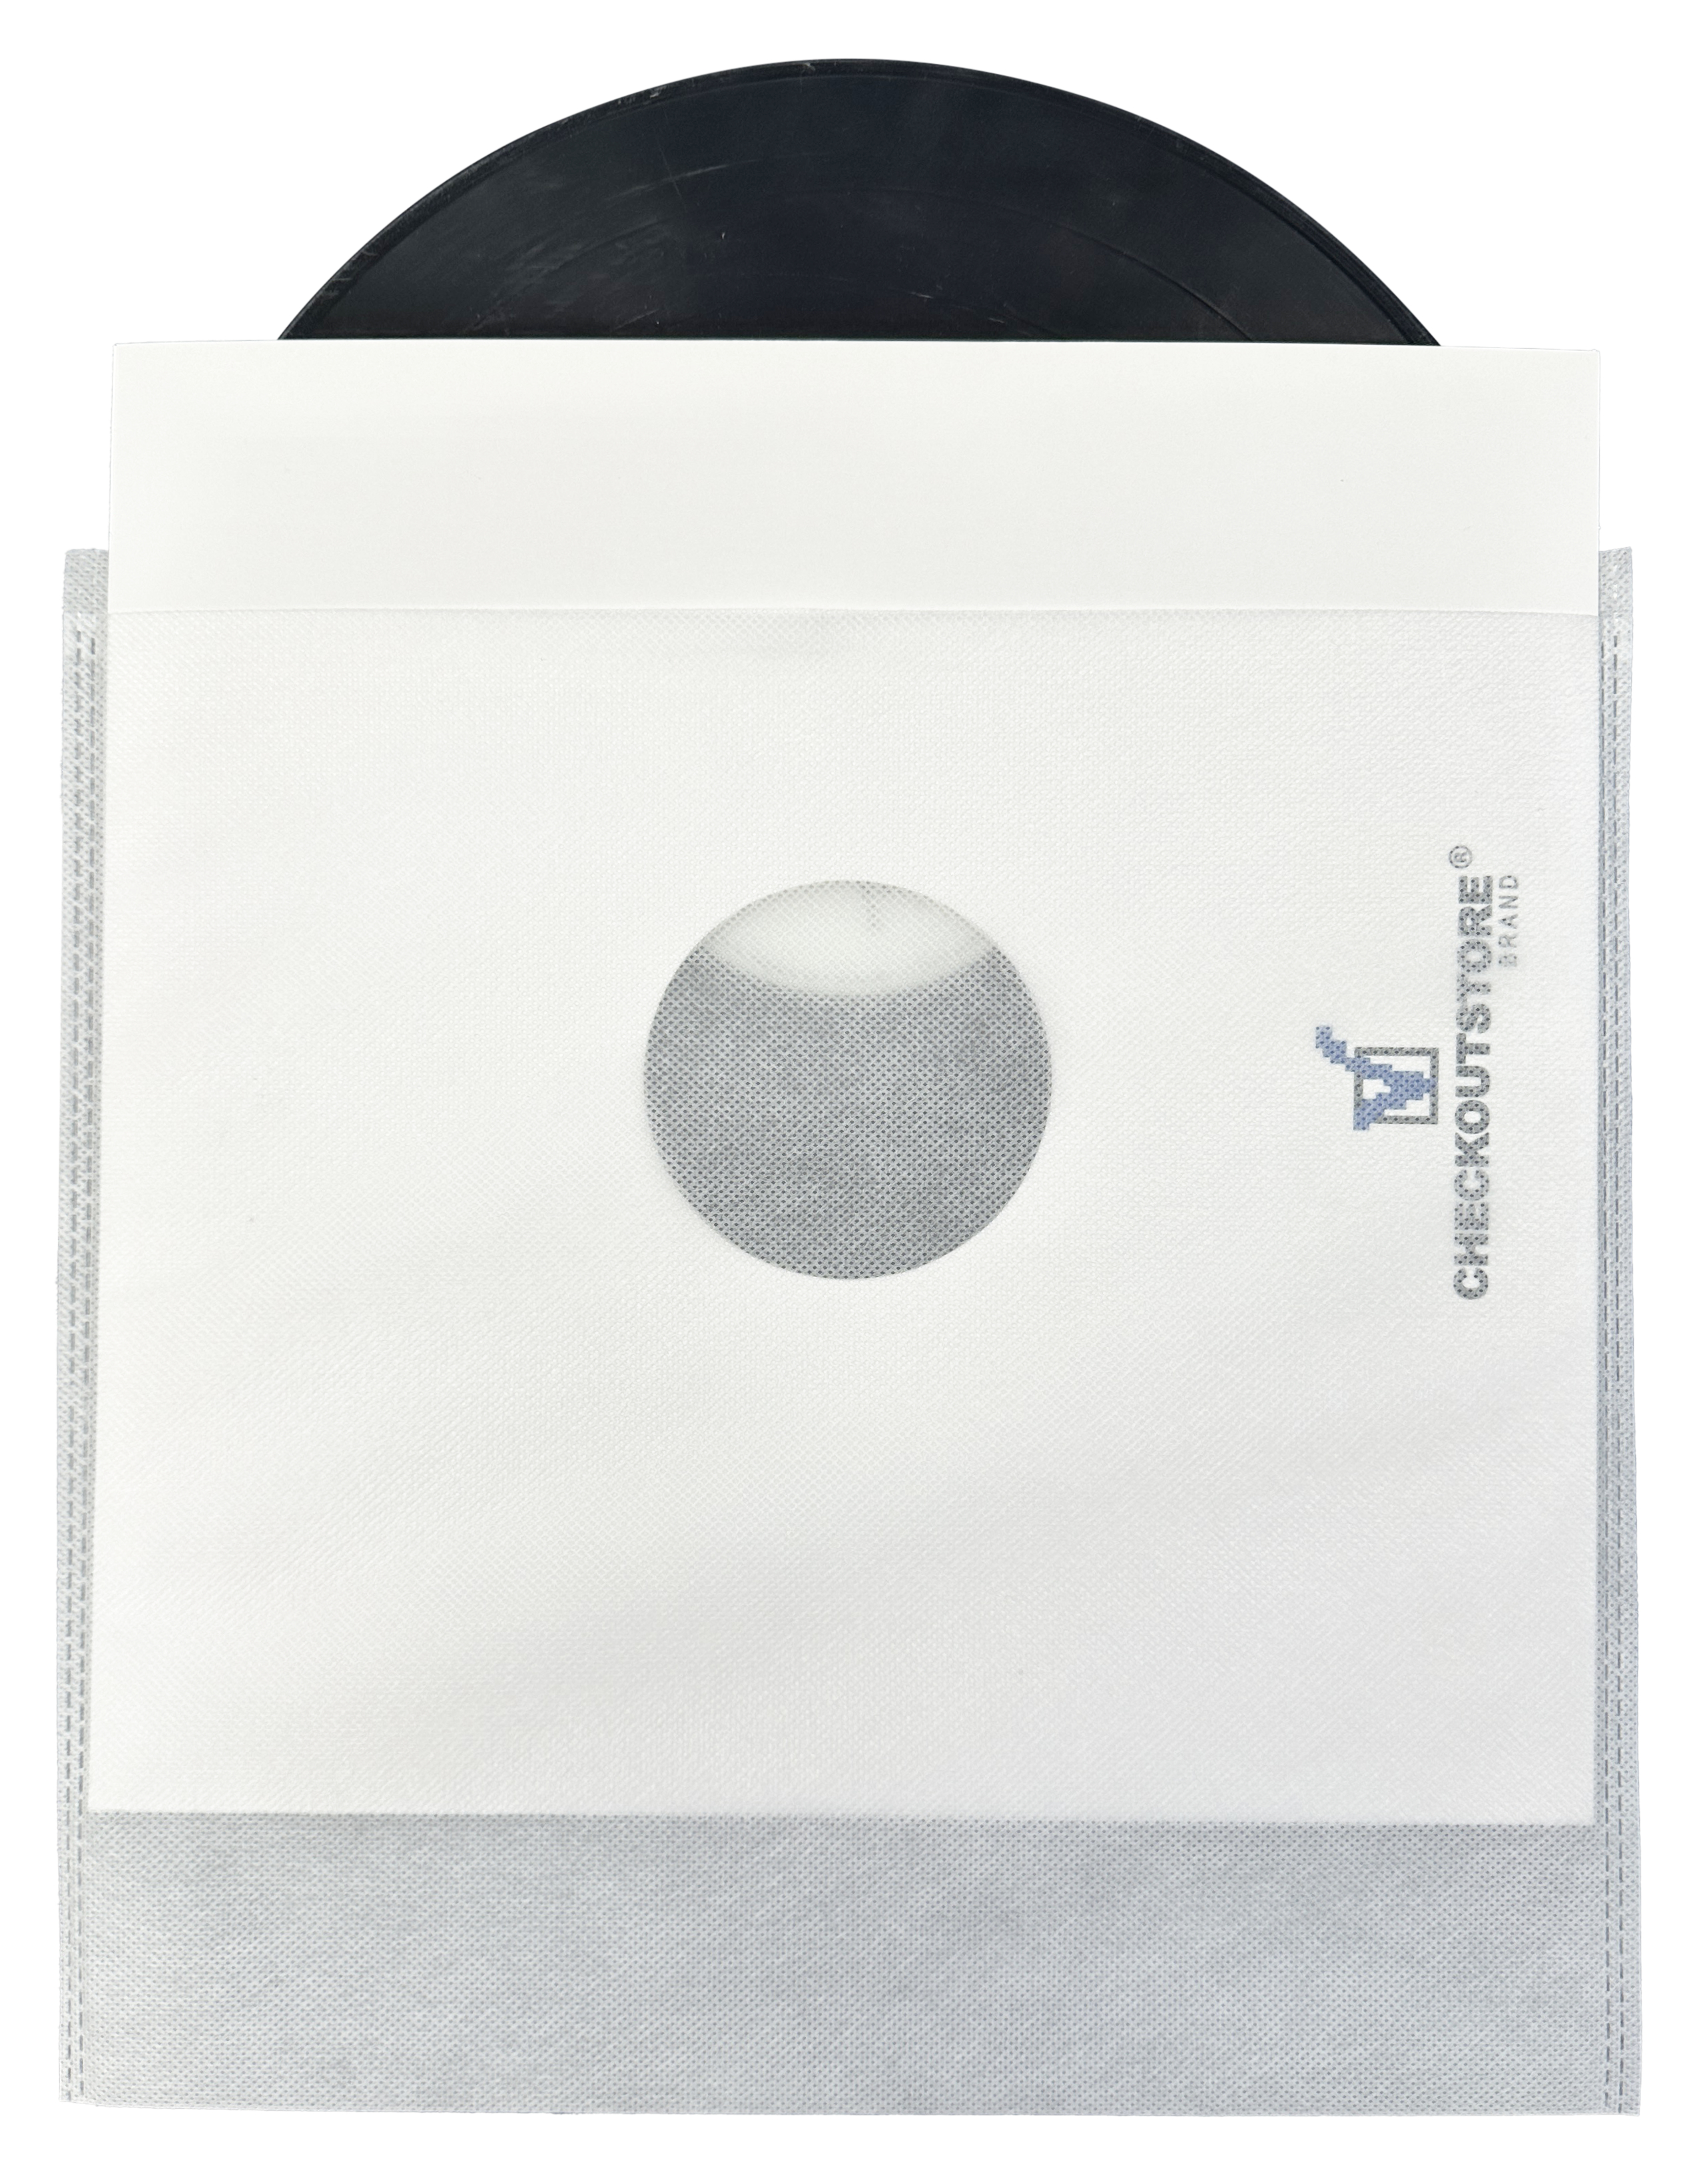 Image of ID 1214260873 500 CheckOutStore White Non Woven Record Outer Sleeves for 12" LP Vinyl 33 RPM Record Albums